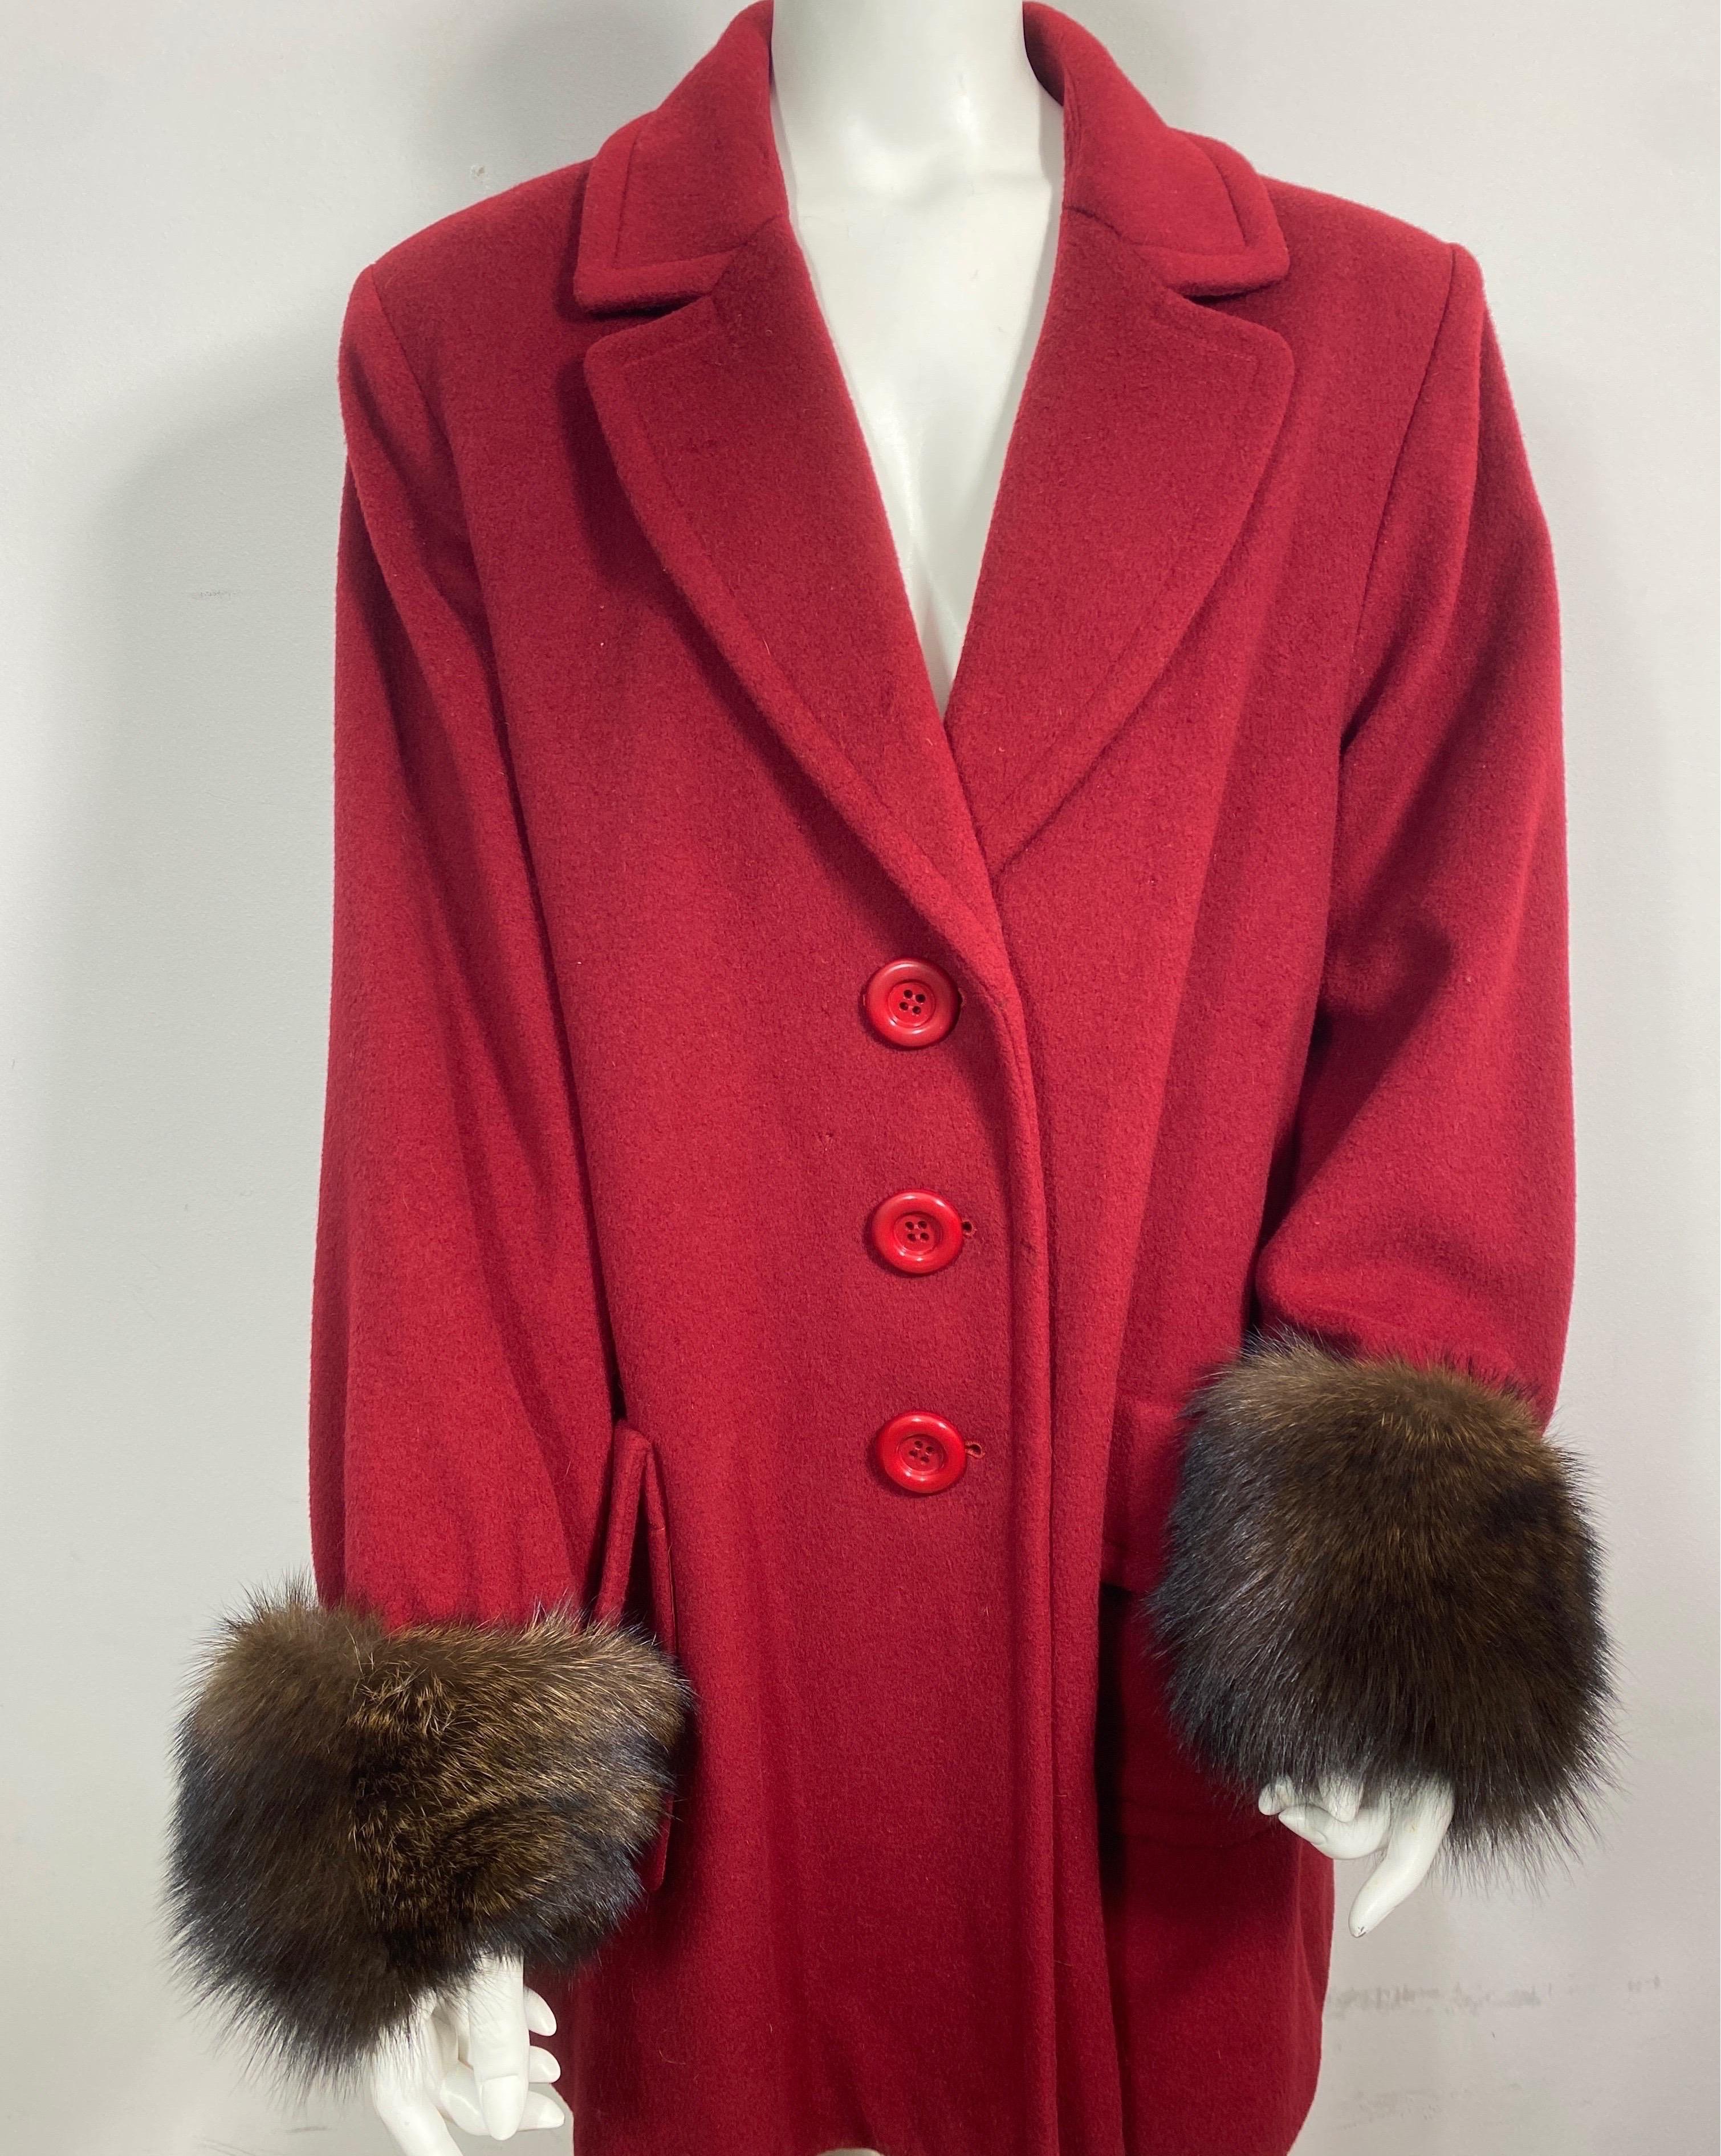 Yves Saint Laurent Garnet Cashmere and Fox Swing Coat -Size Large  This YSL Encore (Encore was specifically made for the US market) 1990’s Swing Coat is a beautiful garnet red and is fully lined. The coat has 3 front buttons, large lapels, 2 front